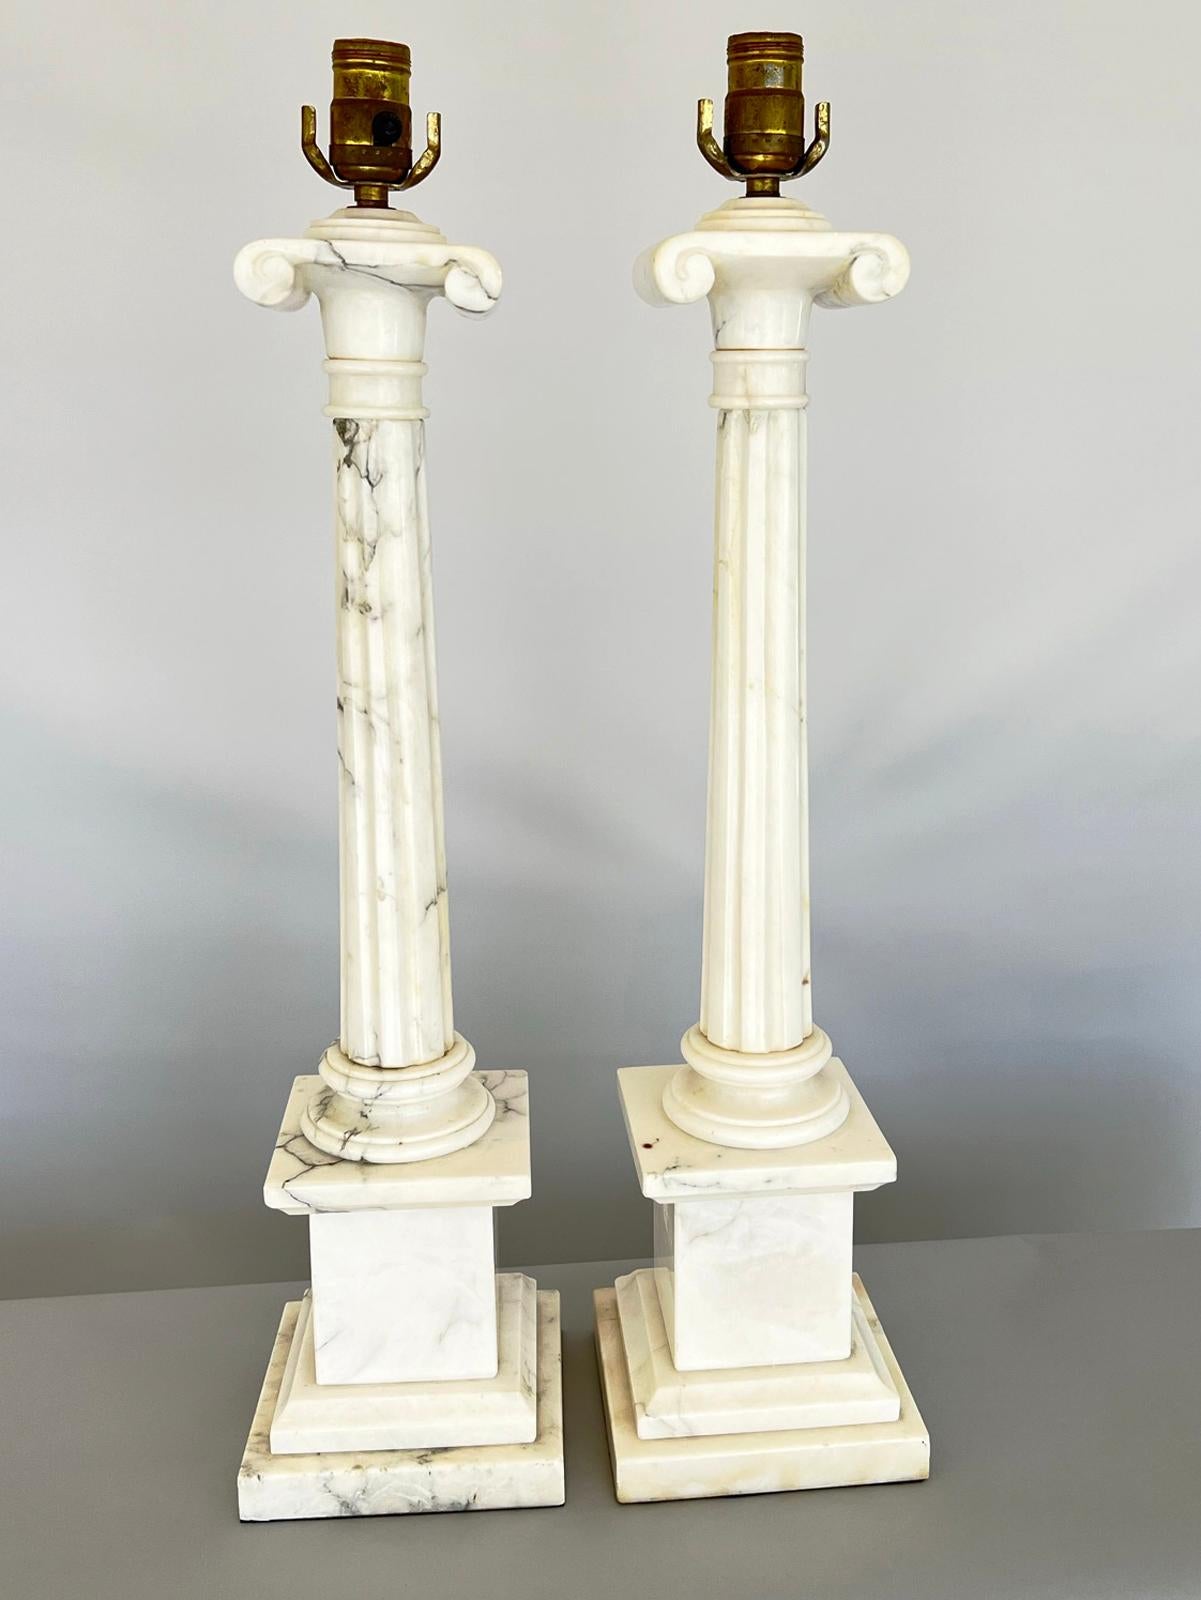 Pair of table lamps, of carved alabaster, each a round, Neoclassical, fluted column, surmounted by an Ionic capital, ending on round foot, and raised on square, graduated plinth base. 

Stock ID: D3613.